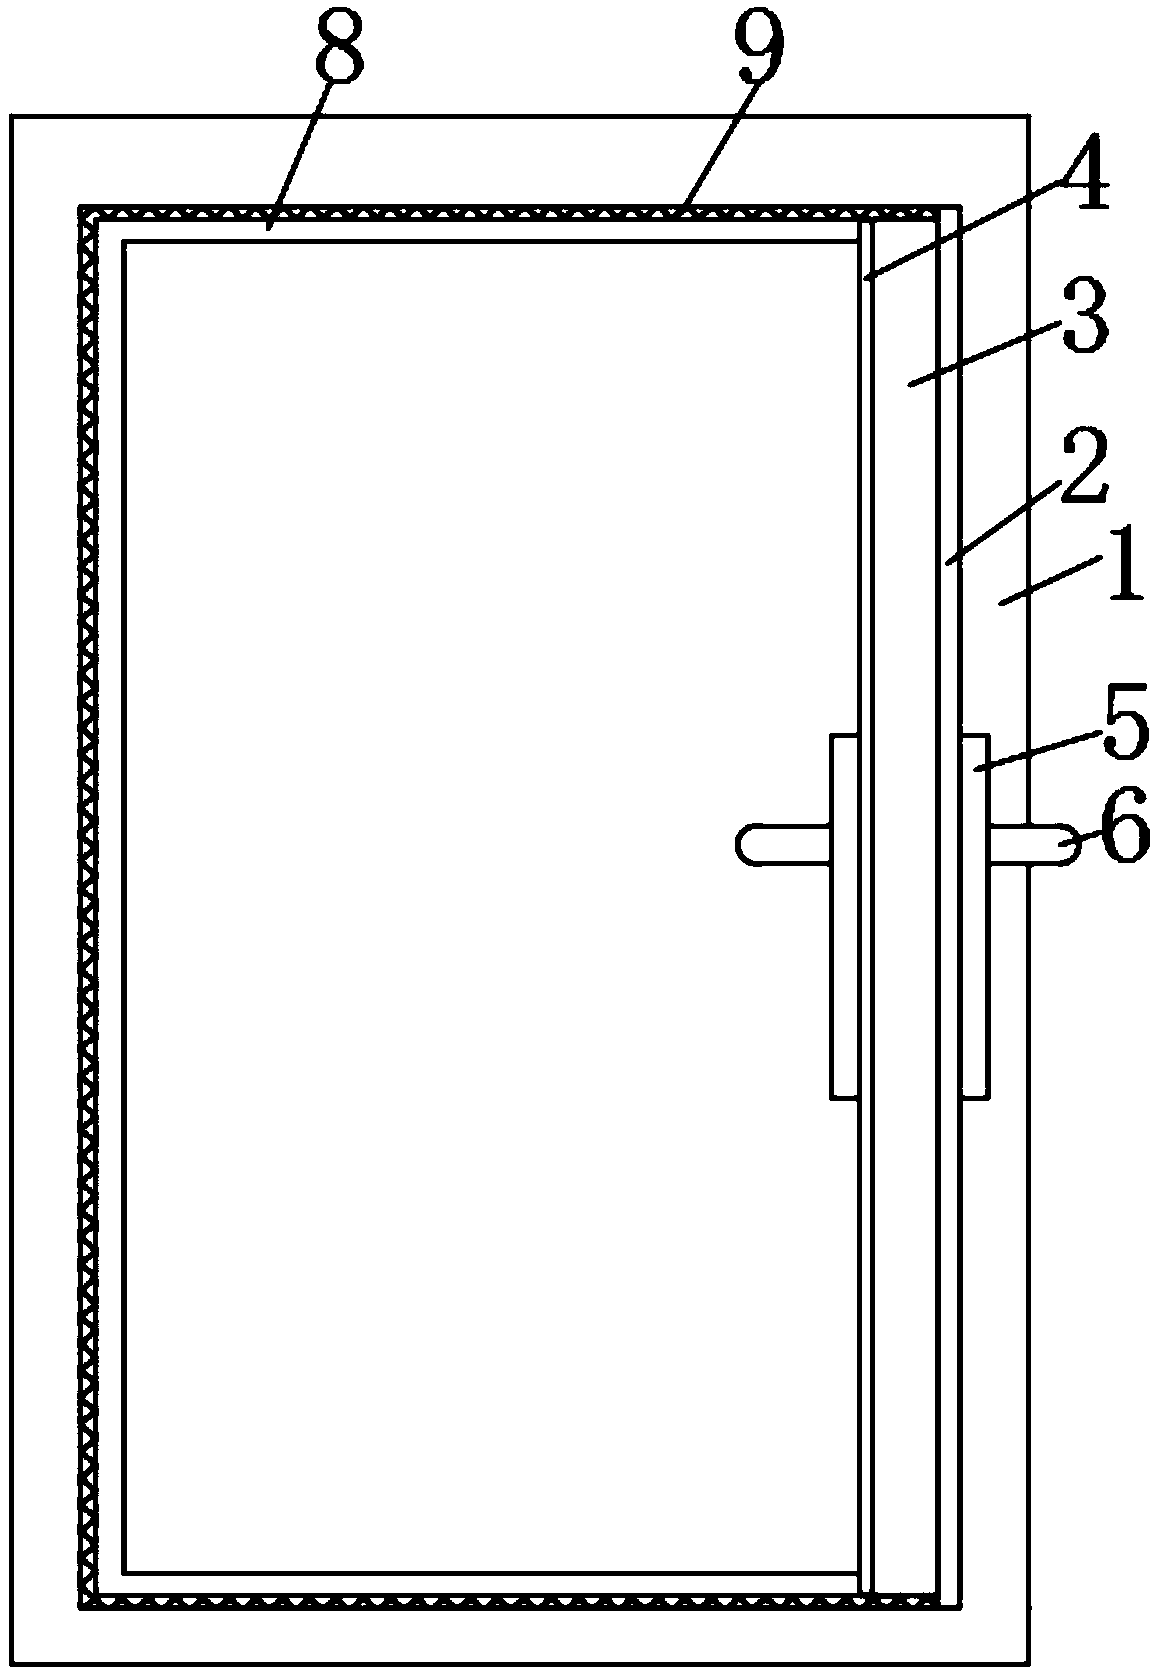 Sound insulation door capable of absorbing harmful substances in air